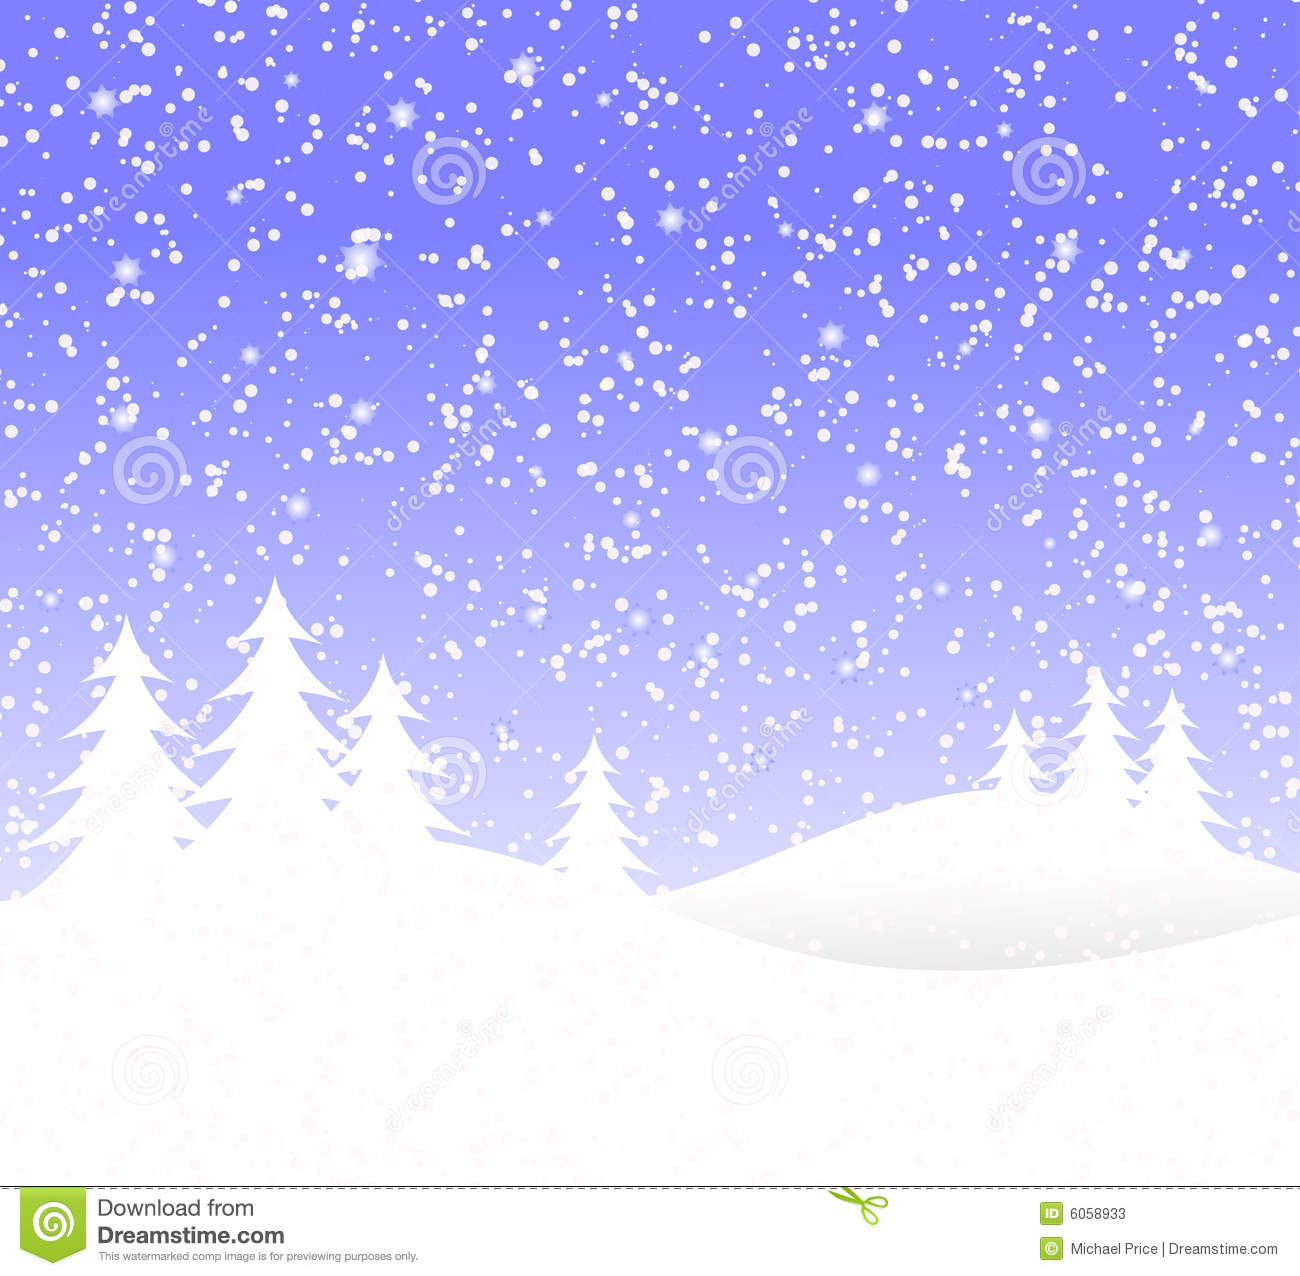 Snowy Winter Background Illustration With White Trees On Snowy Hills